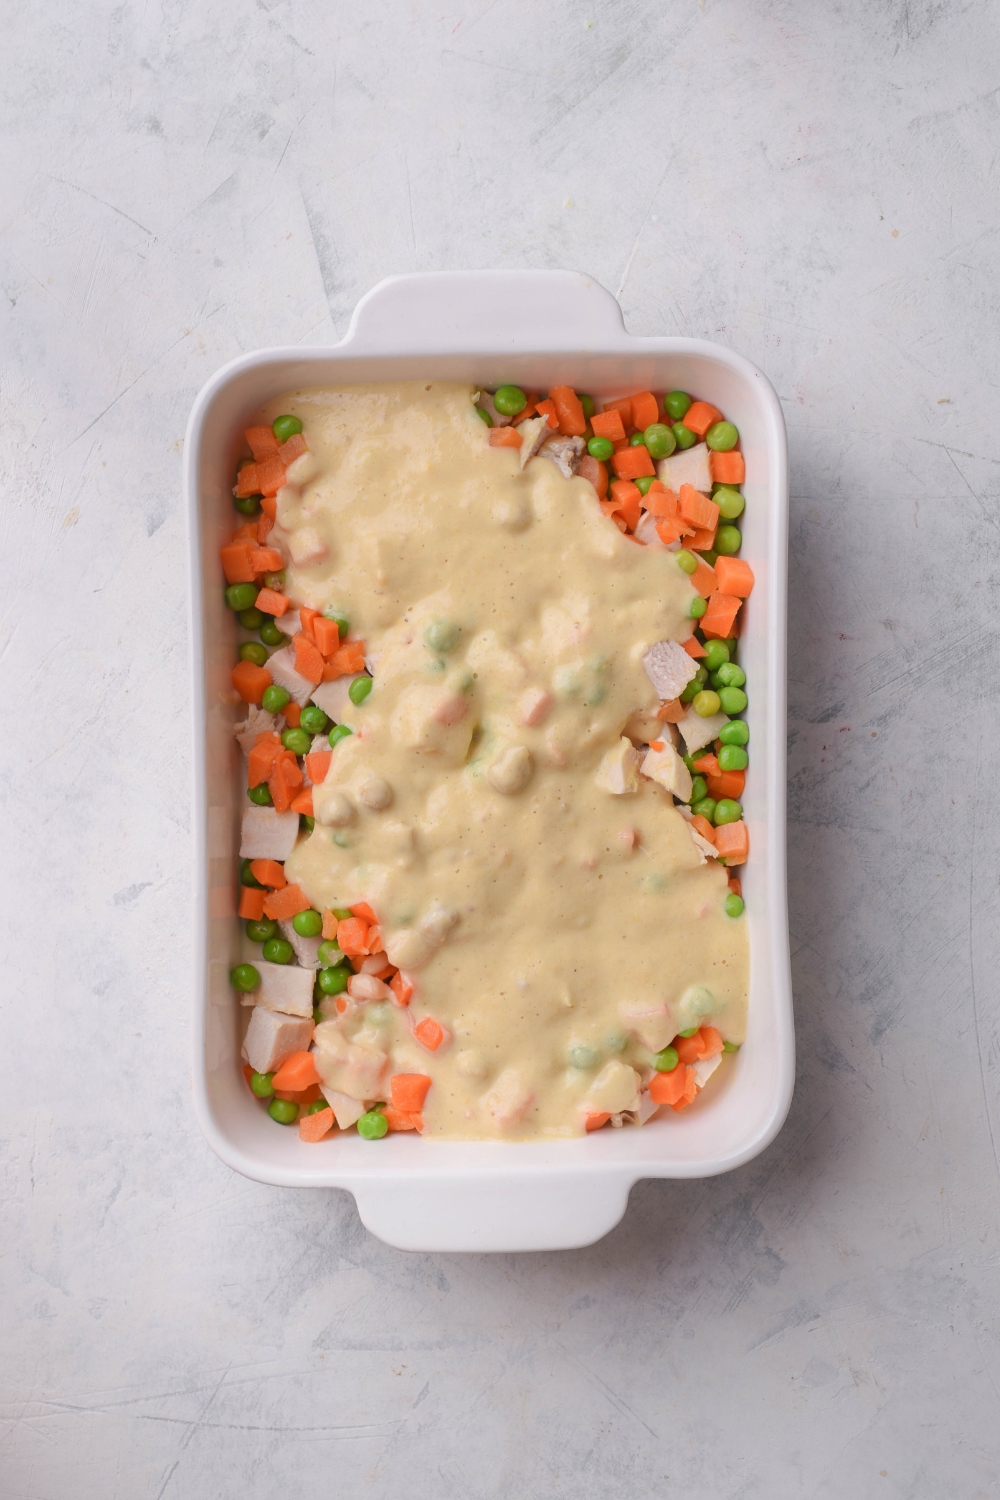 A baking dish filled with diced chicken, peas, and carrots, and a creamy soup mixture has been poured on top.